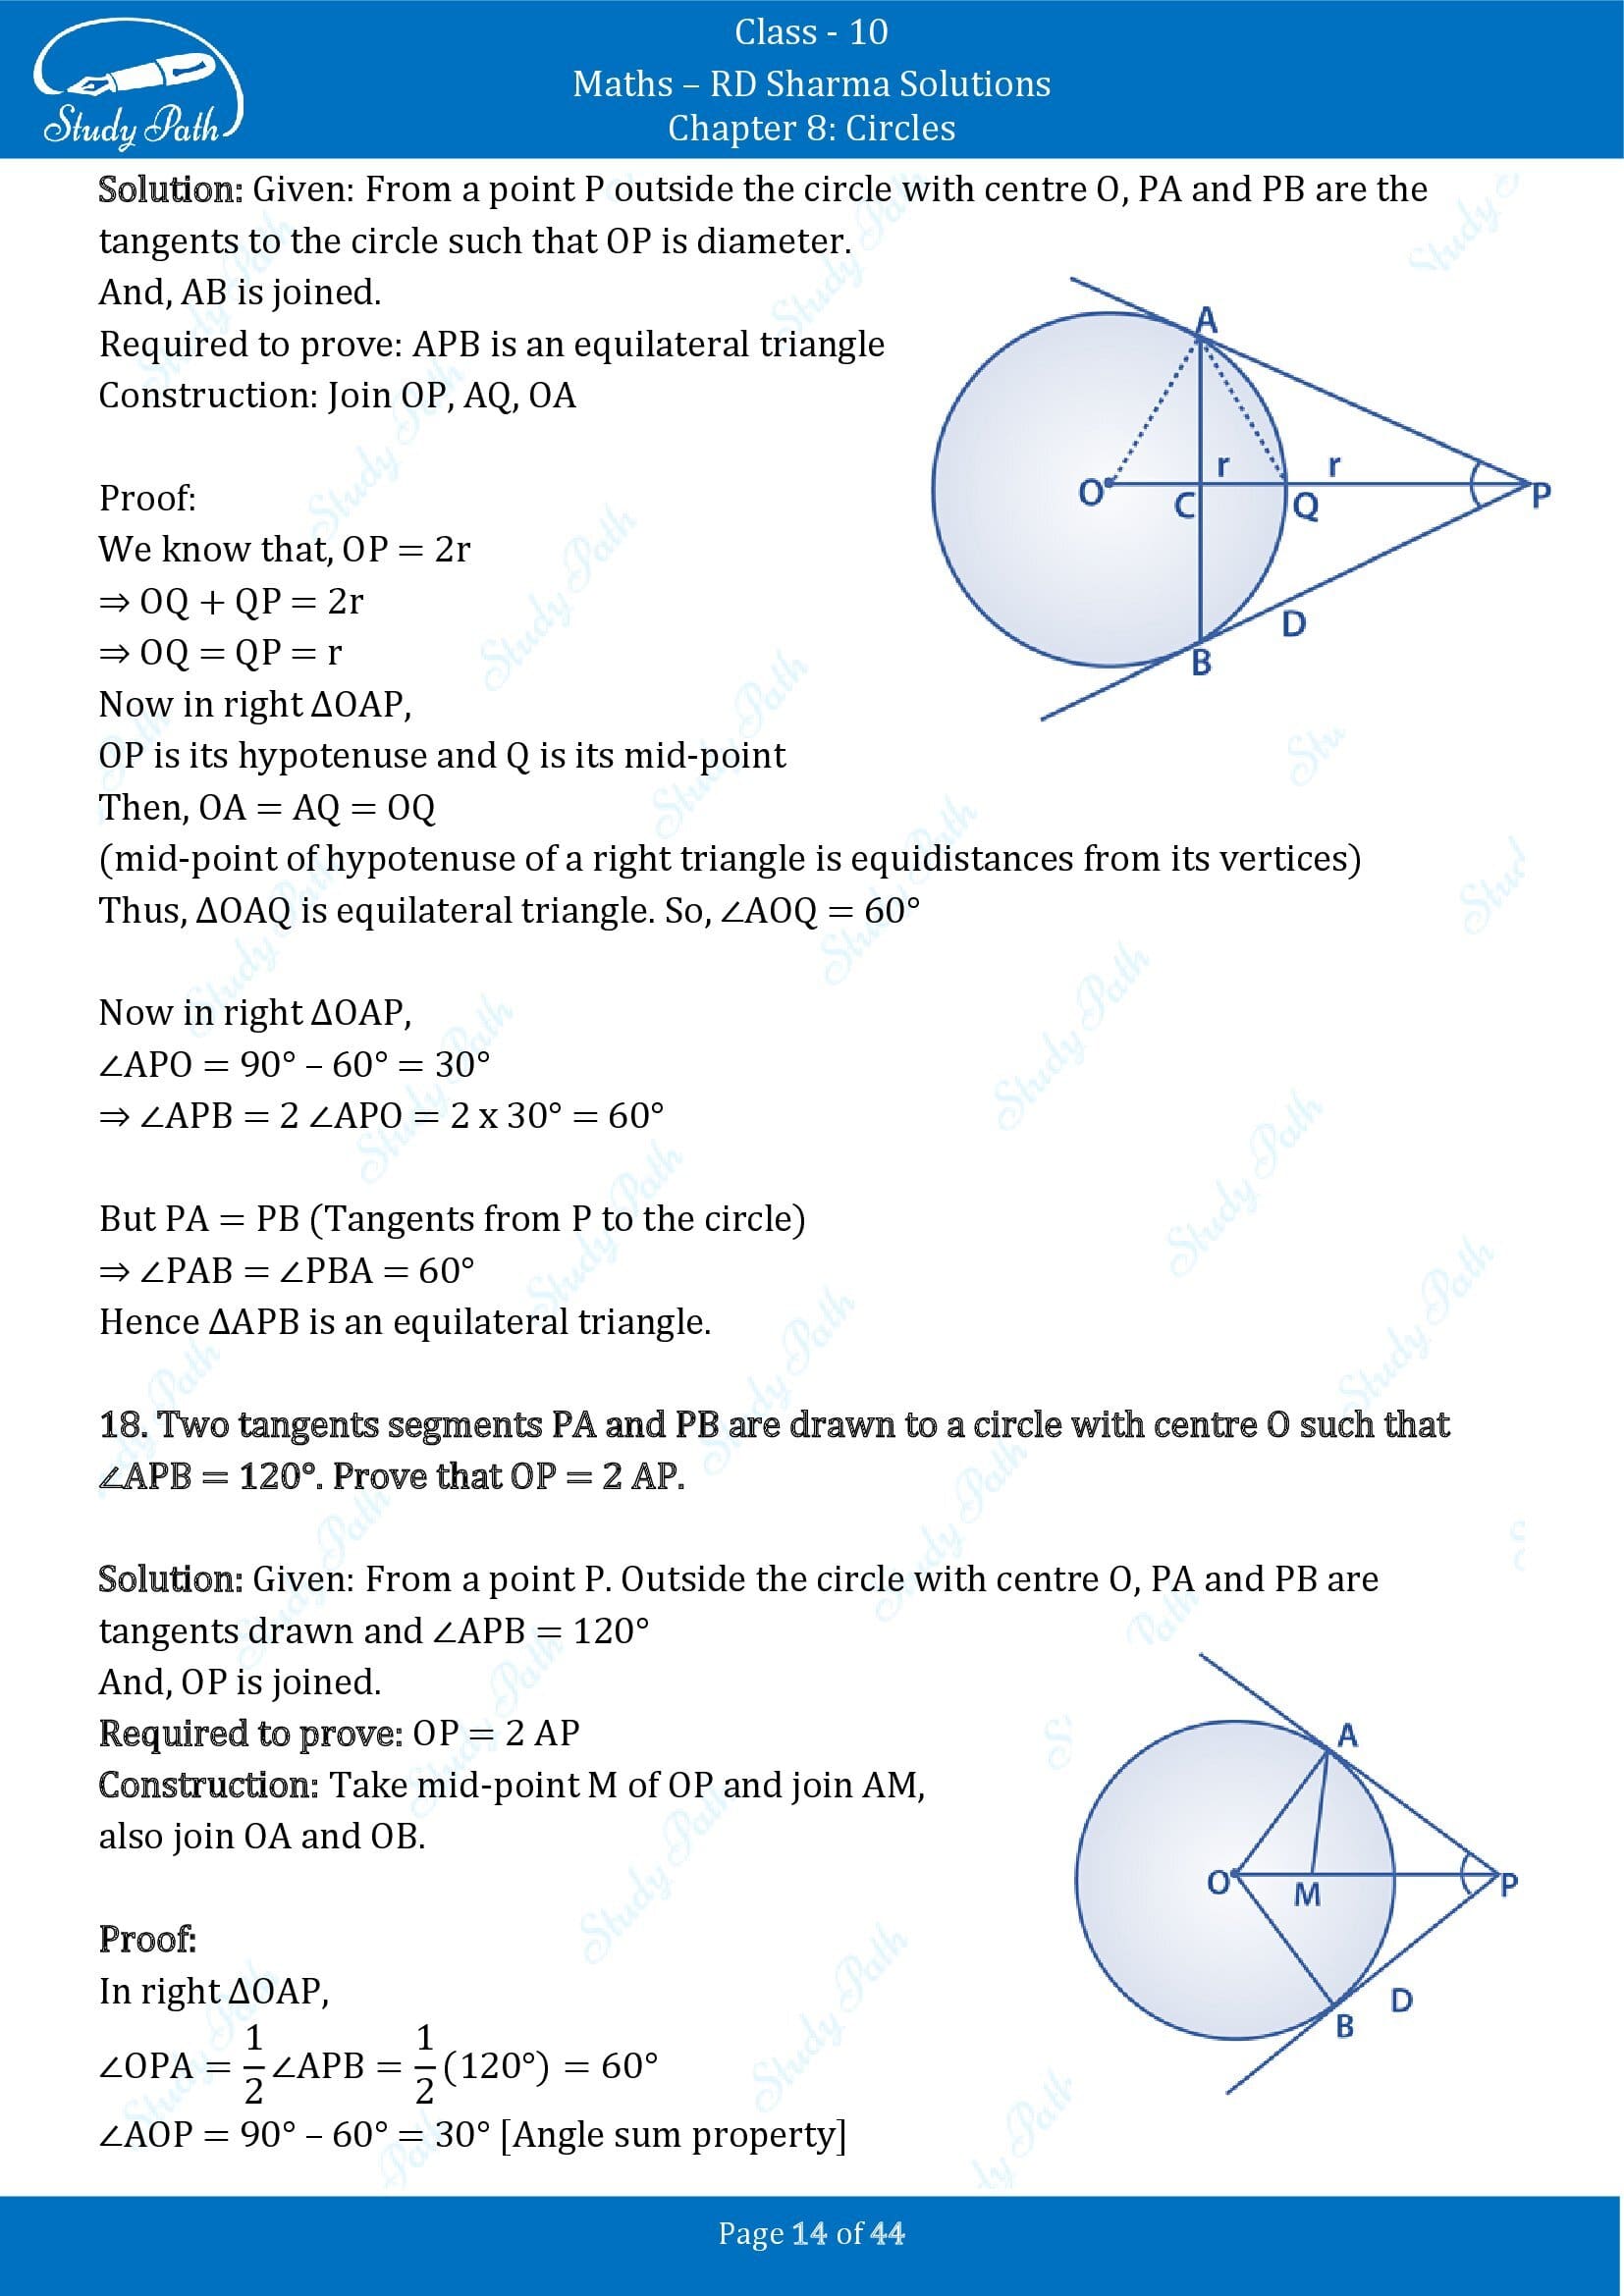 RD Sharma Solutions Class 10 Chapter 8 Circles Exercise 8.2 00014